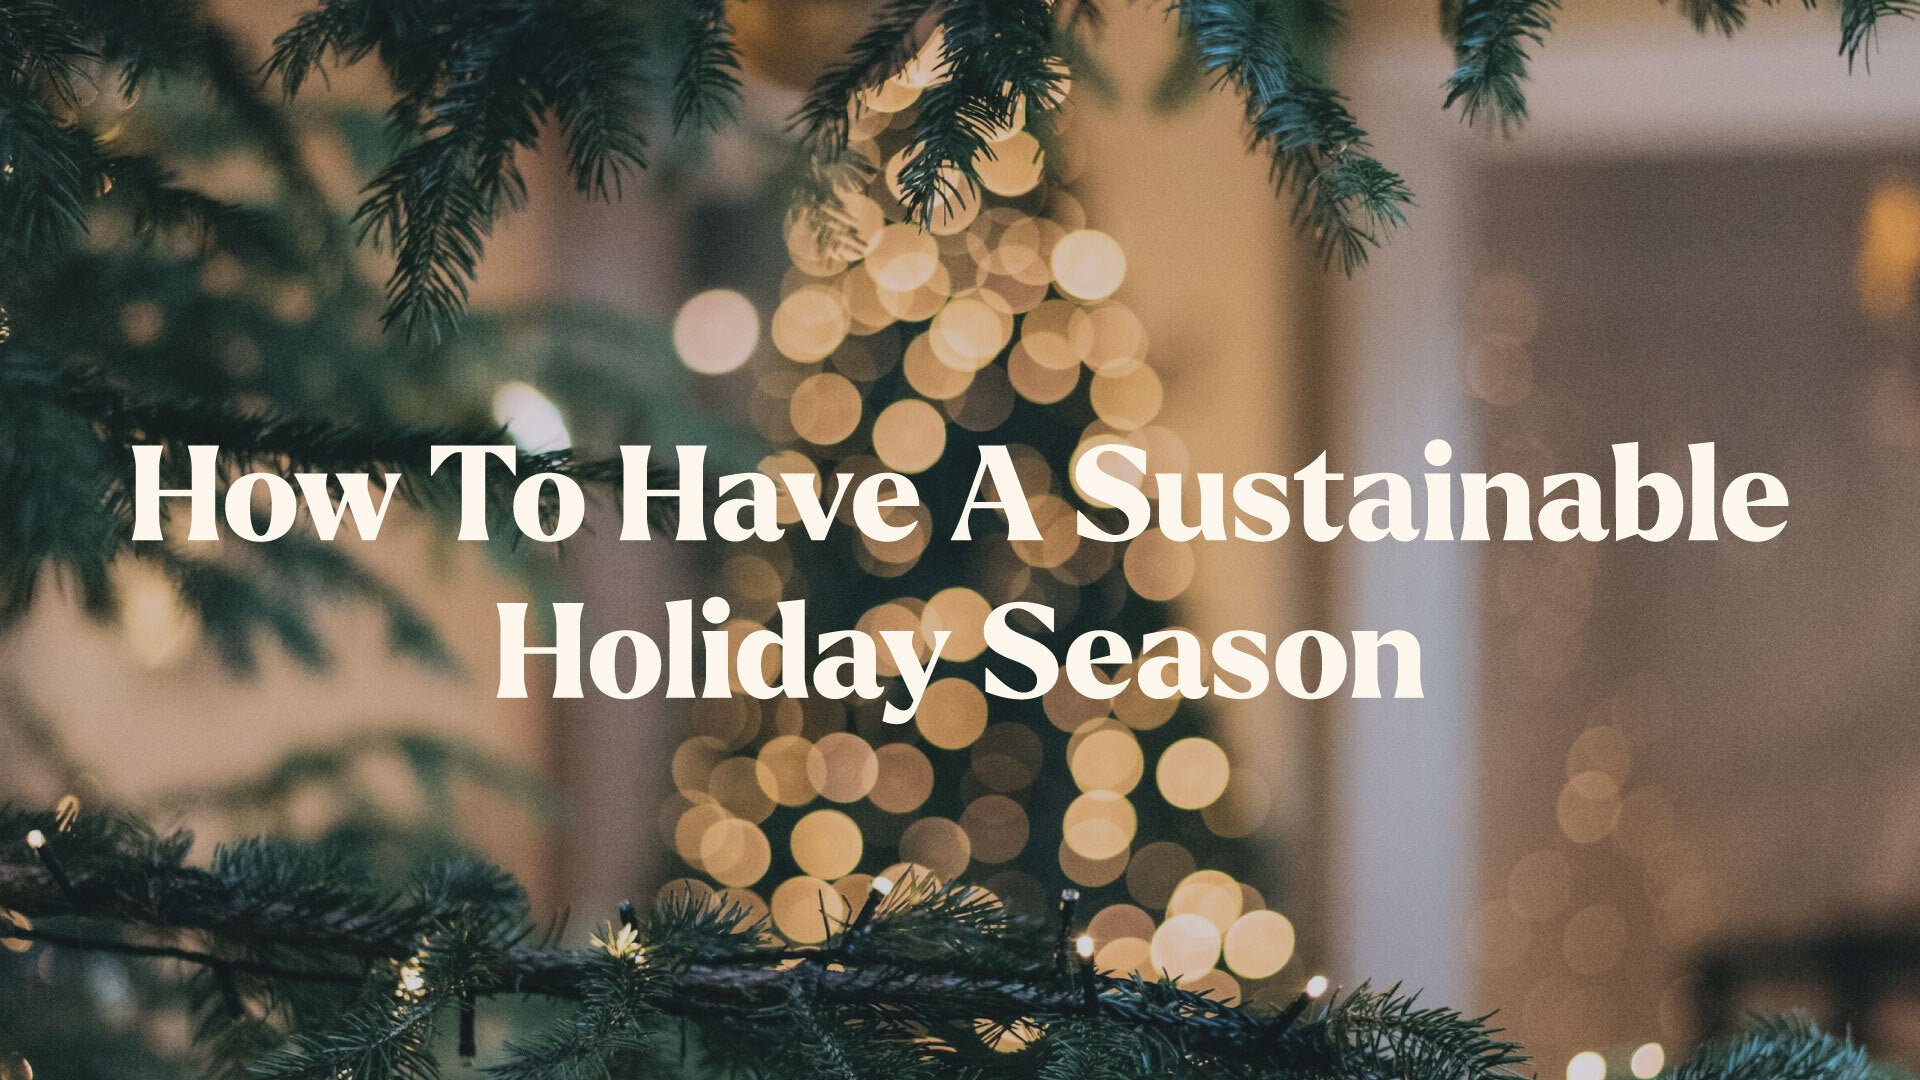 How To Have A Sustainable Holiday Season This Year